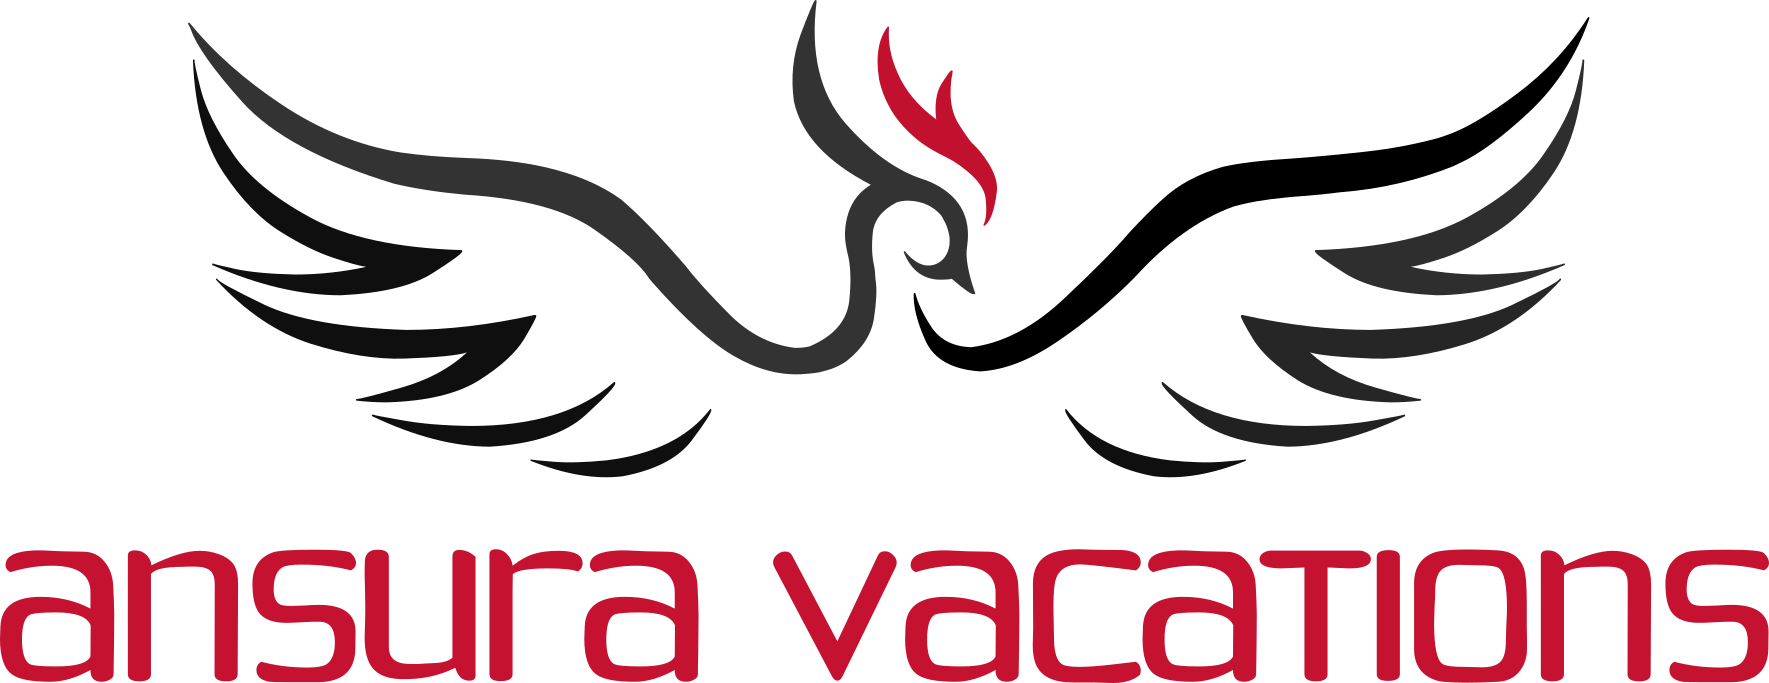 A red and black logo for a vacation rental.